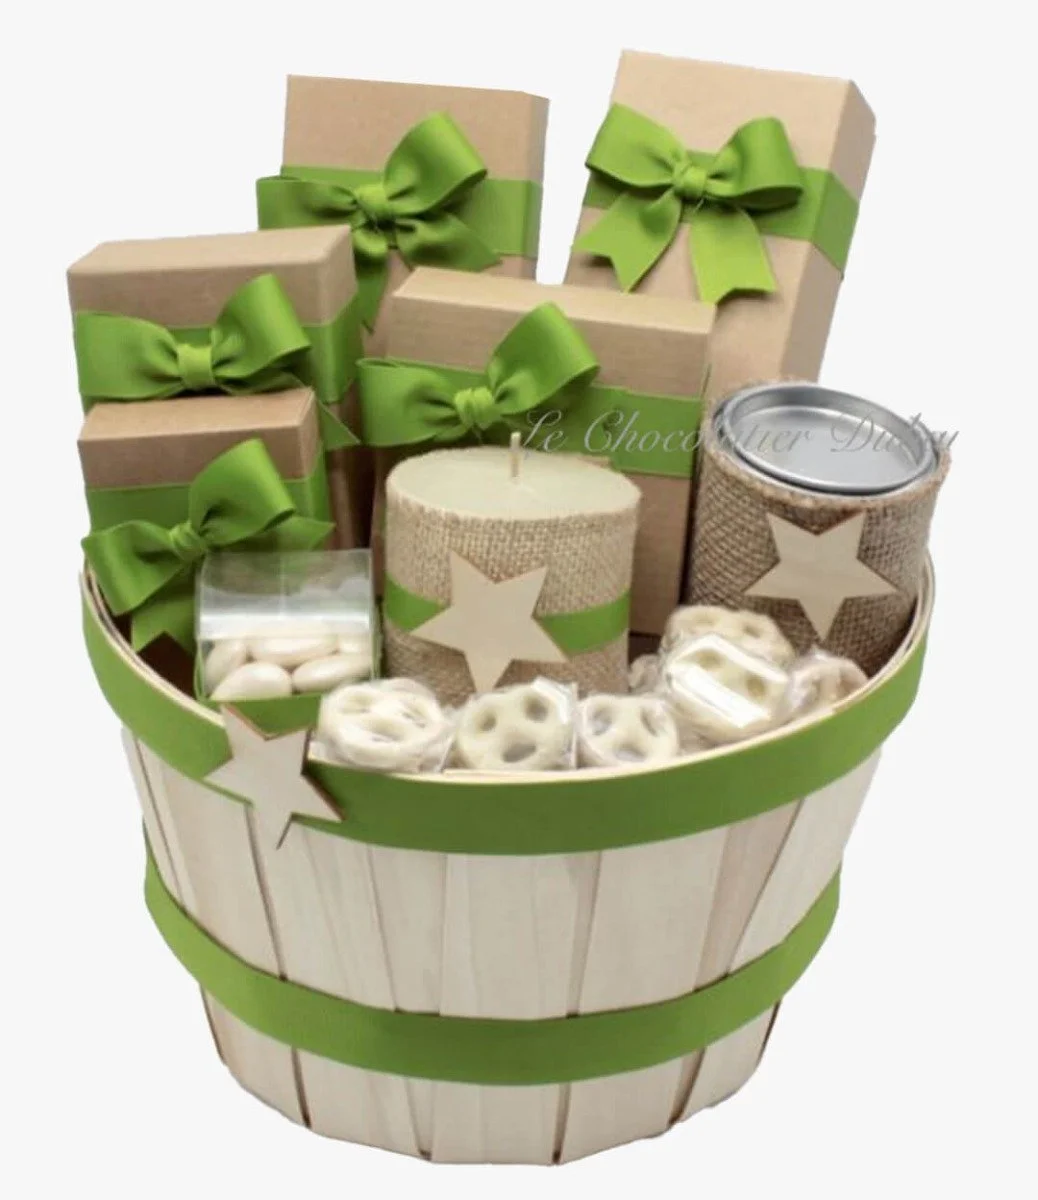 Stars Decorated Chocolate Sweets Bucket Hamper - Green By Le Chocolatier